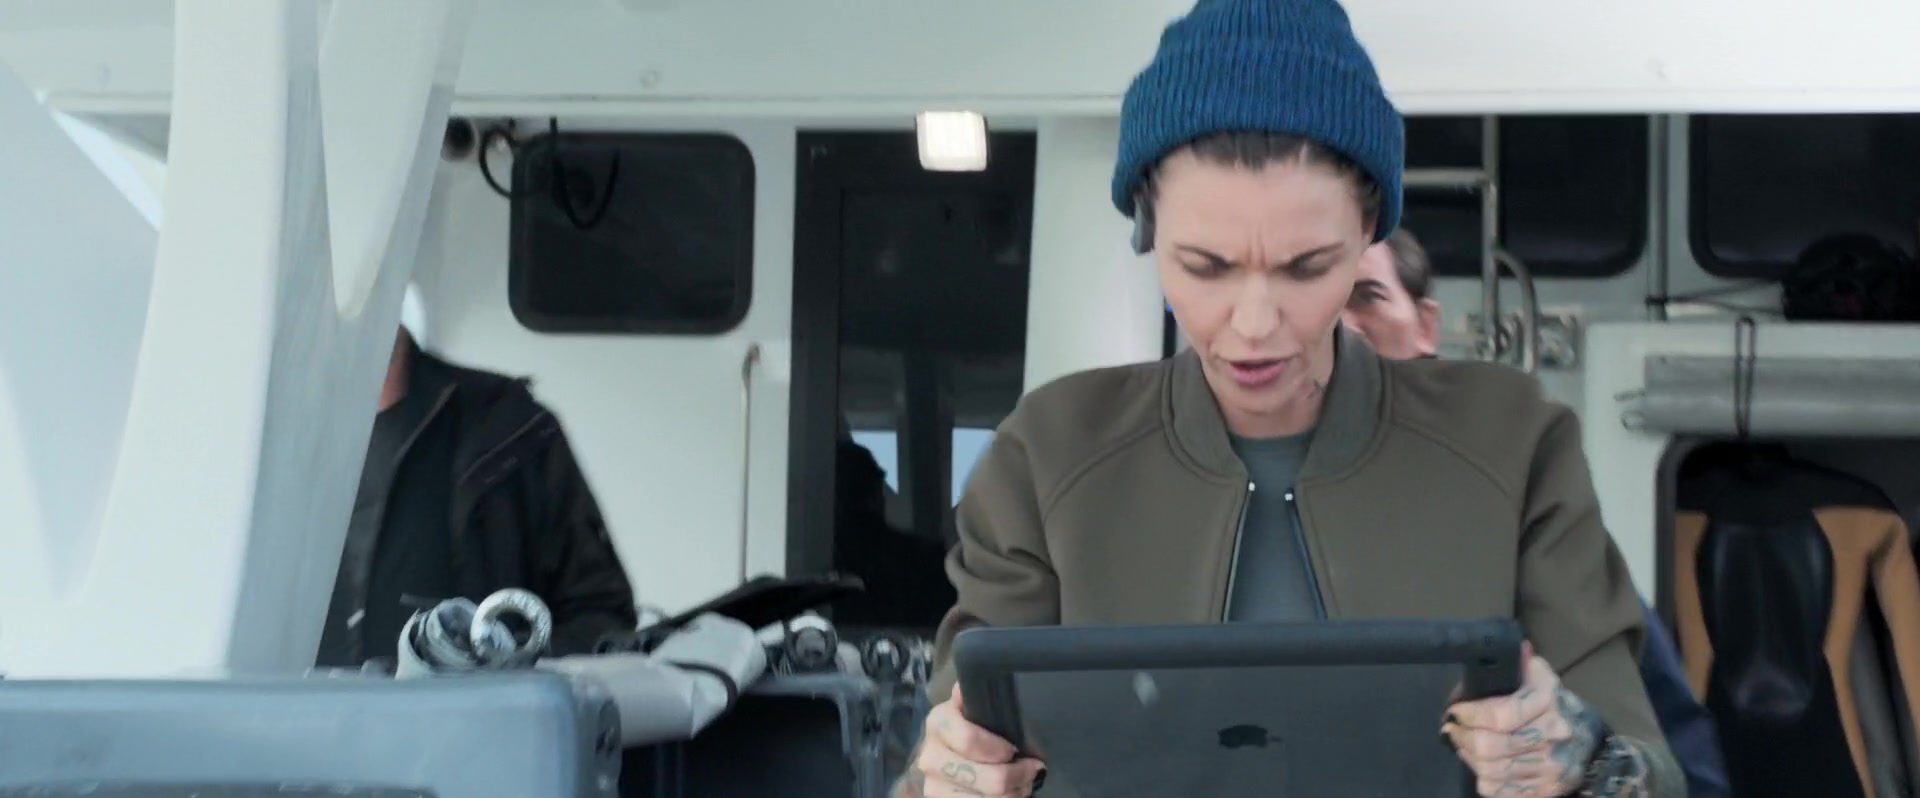 Apple Ipad Tablet Used By Ruby Rose In The Meg 2018